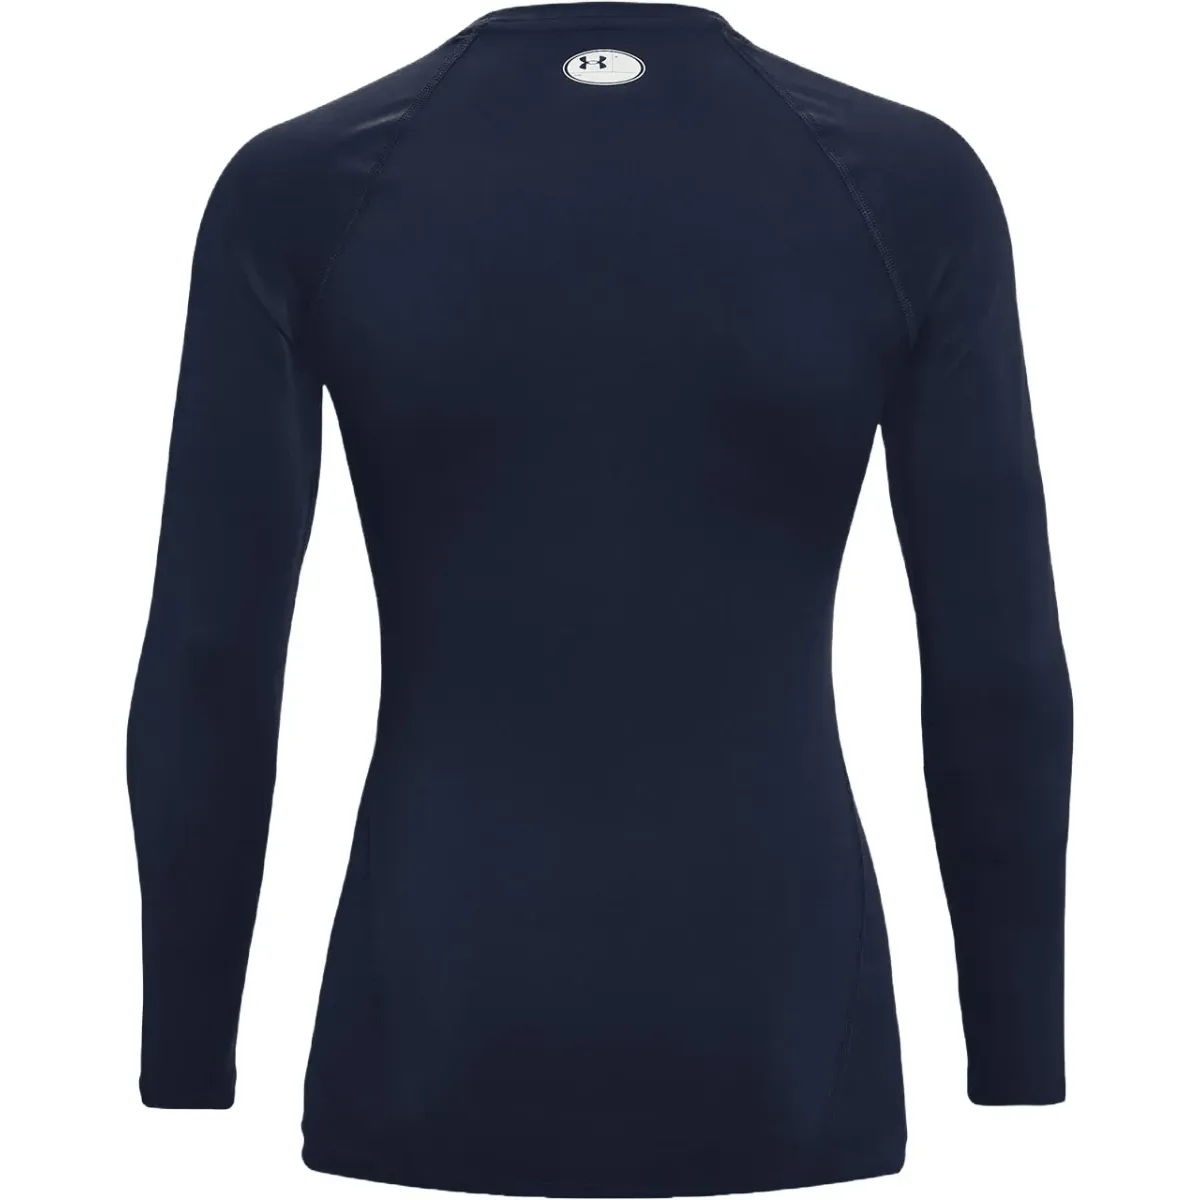 Womens Charcoal Light Heather Under Armour Heatgear Compression